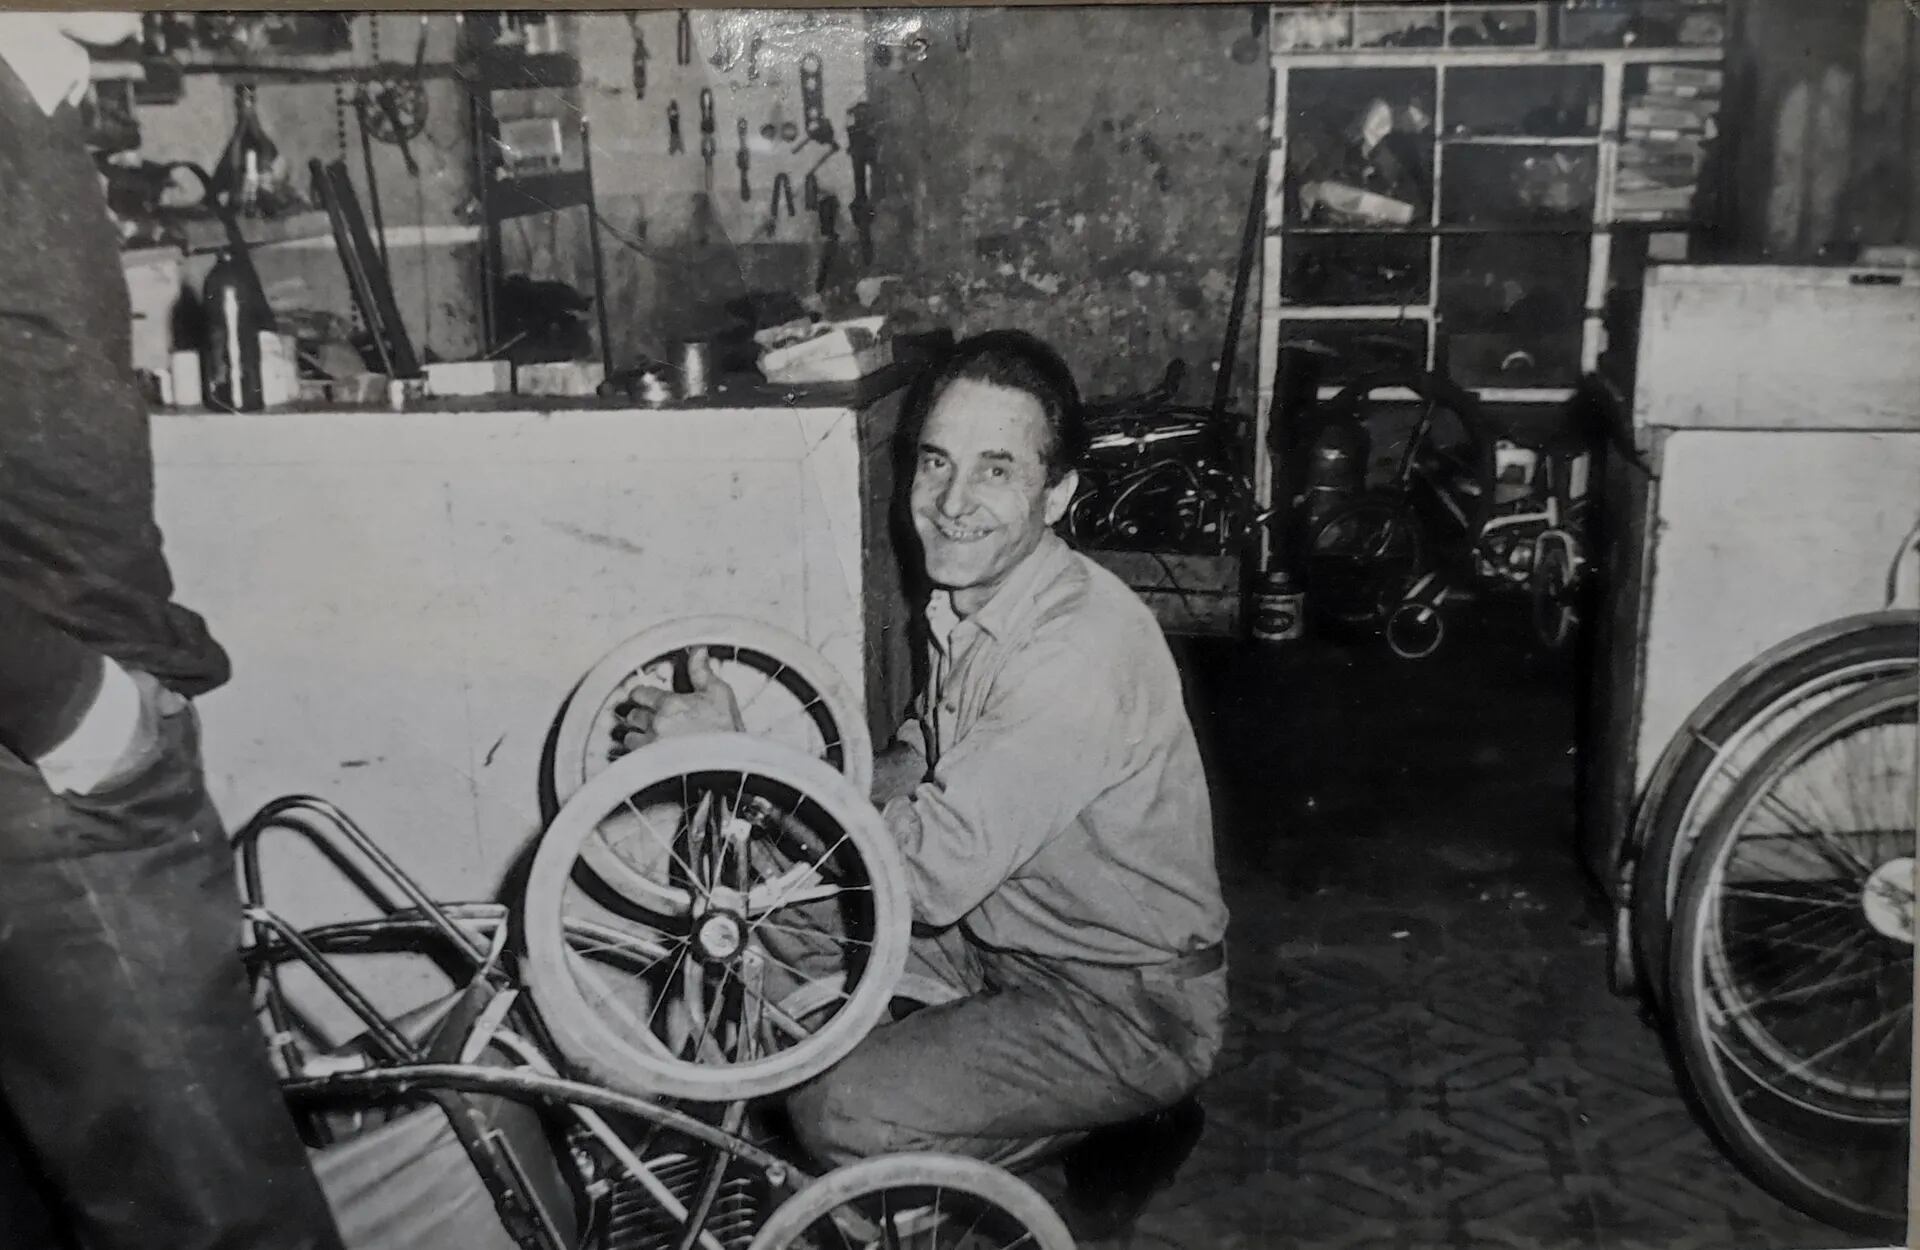 The champion cyclist, who was running at 110km/h, wanted to expand the family business but had to reinvent himself: “With Menem I lost everything”